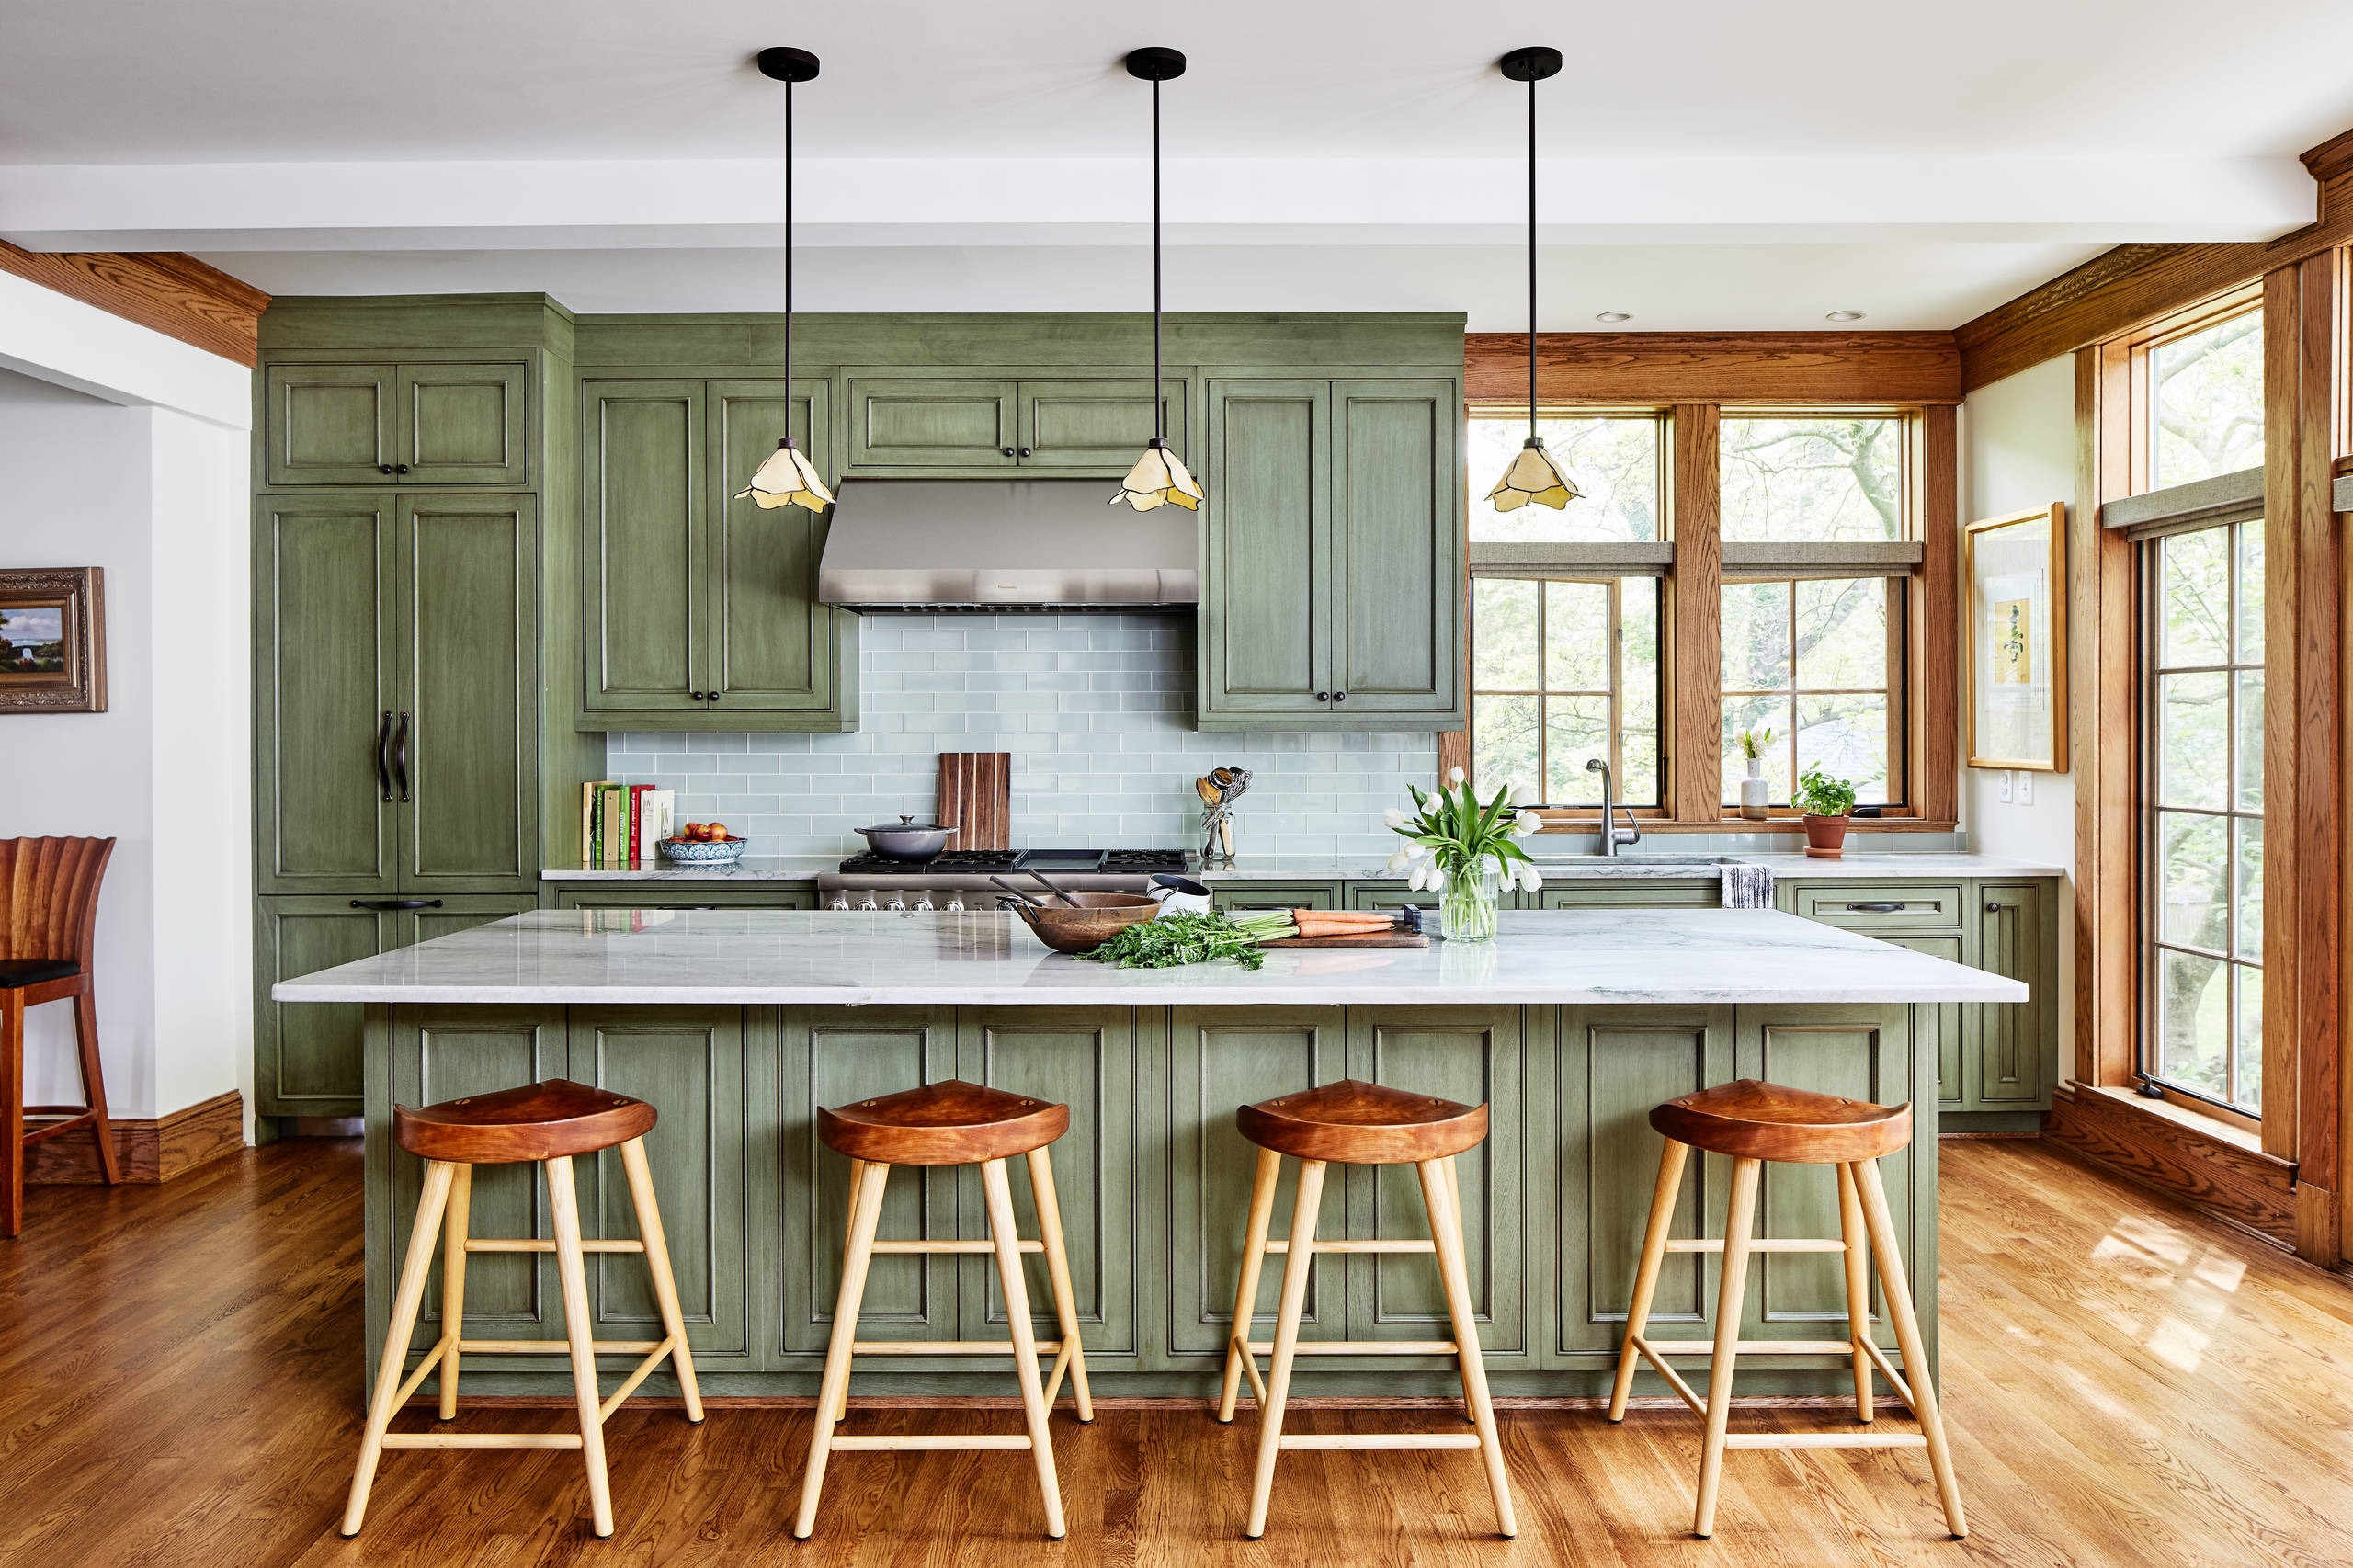 https://foter.com/photos/424/kitchen-with-aged-repurposed-wood-cabinets.jpg